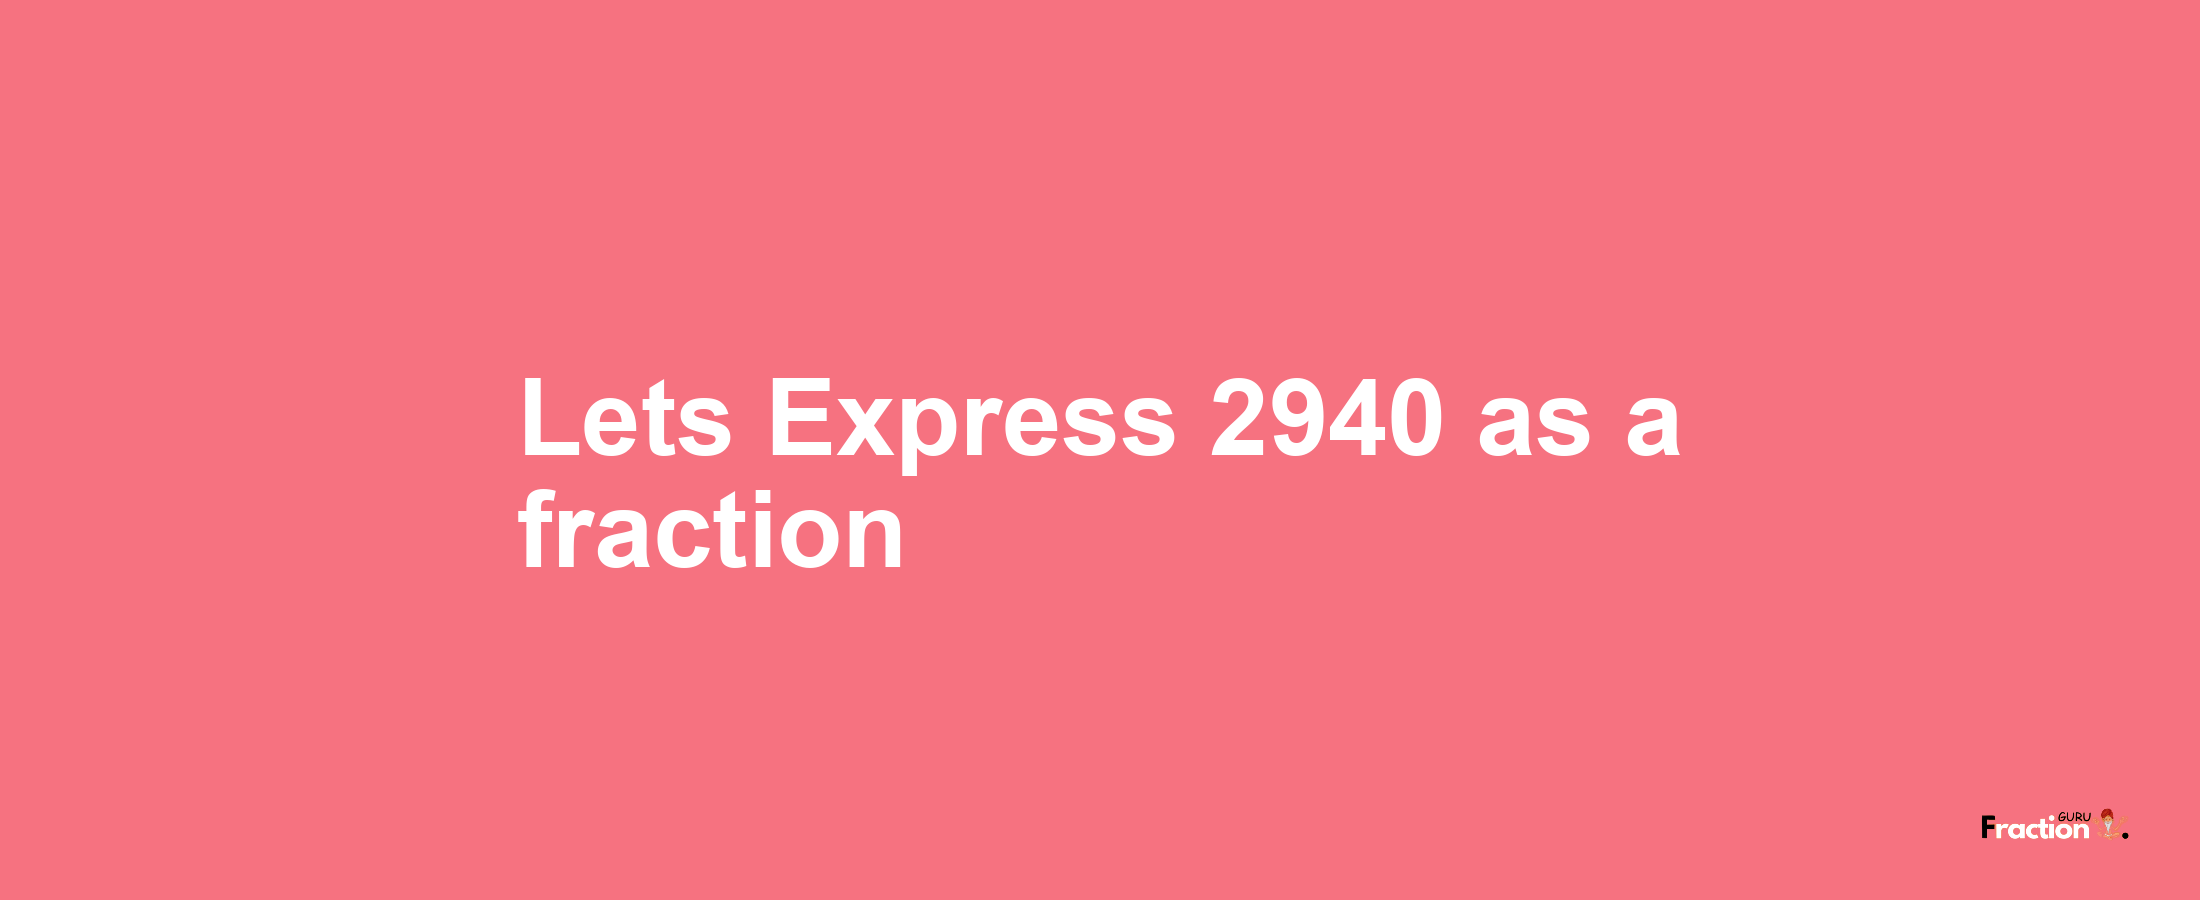 Lets Express 2940 as afraction